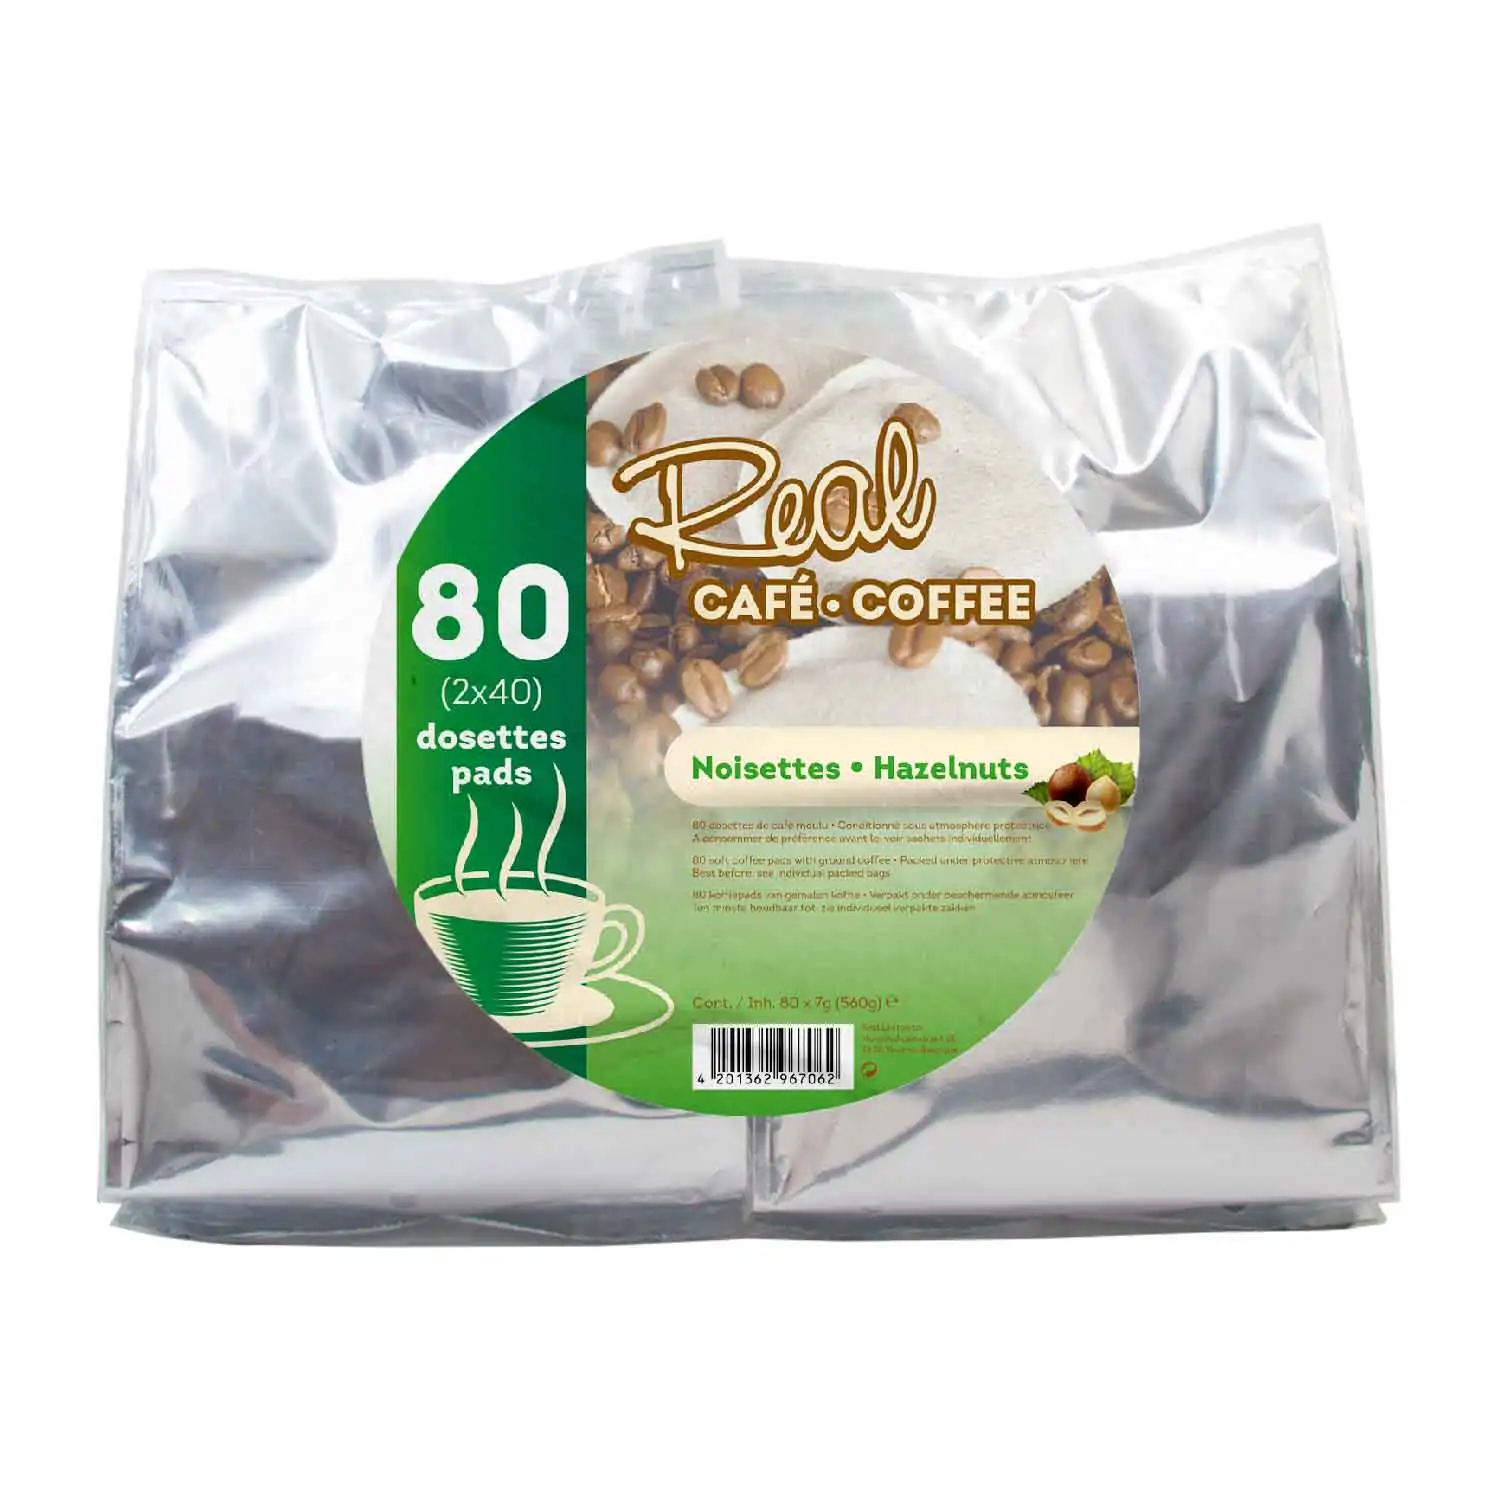 Real café noisettes 2x40 dosettes - Buy at Real Tobacco